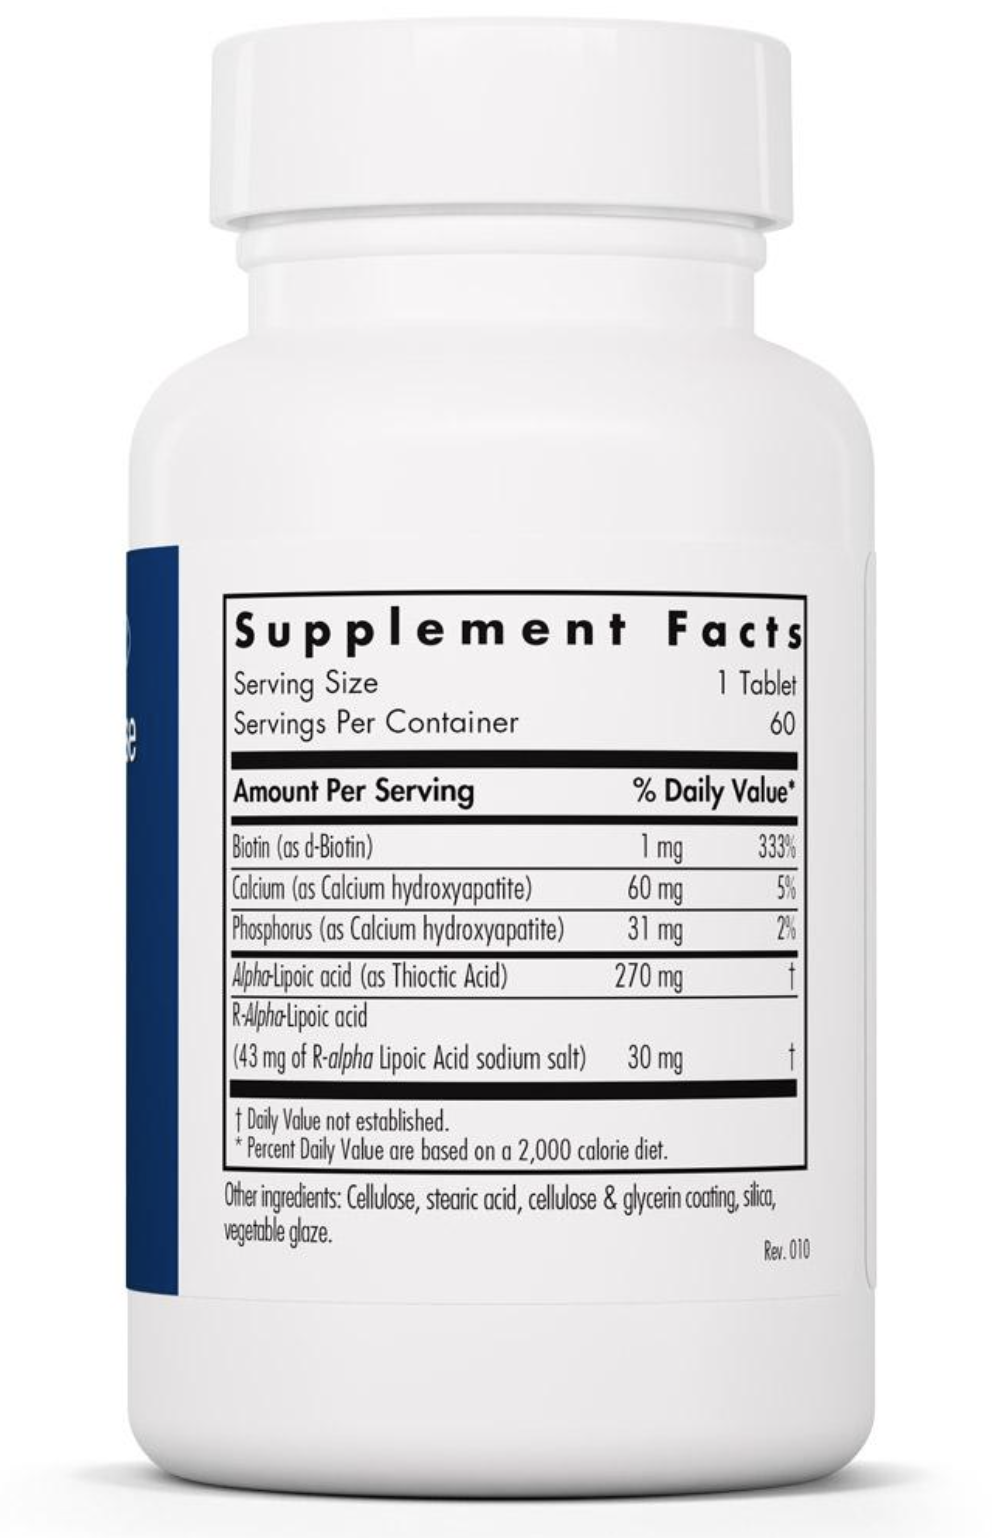 ALA Release (alpha lipoic acid) 60 tablets Allergy Research Group - Premium Vitamins & Supplements from Allergy Research Group - Just $34.99! Shop now at Nutrigeek